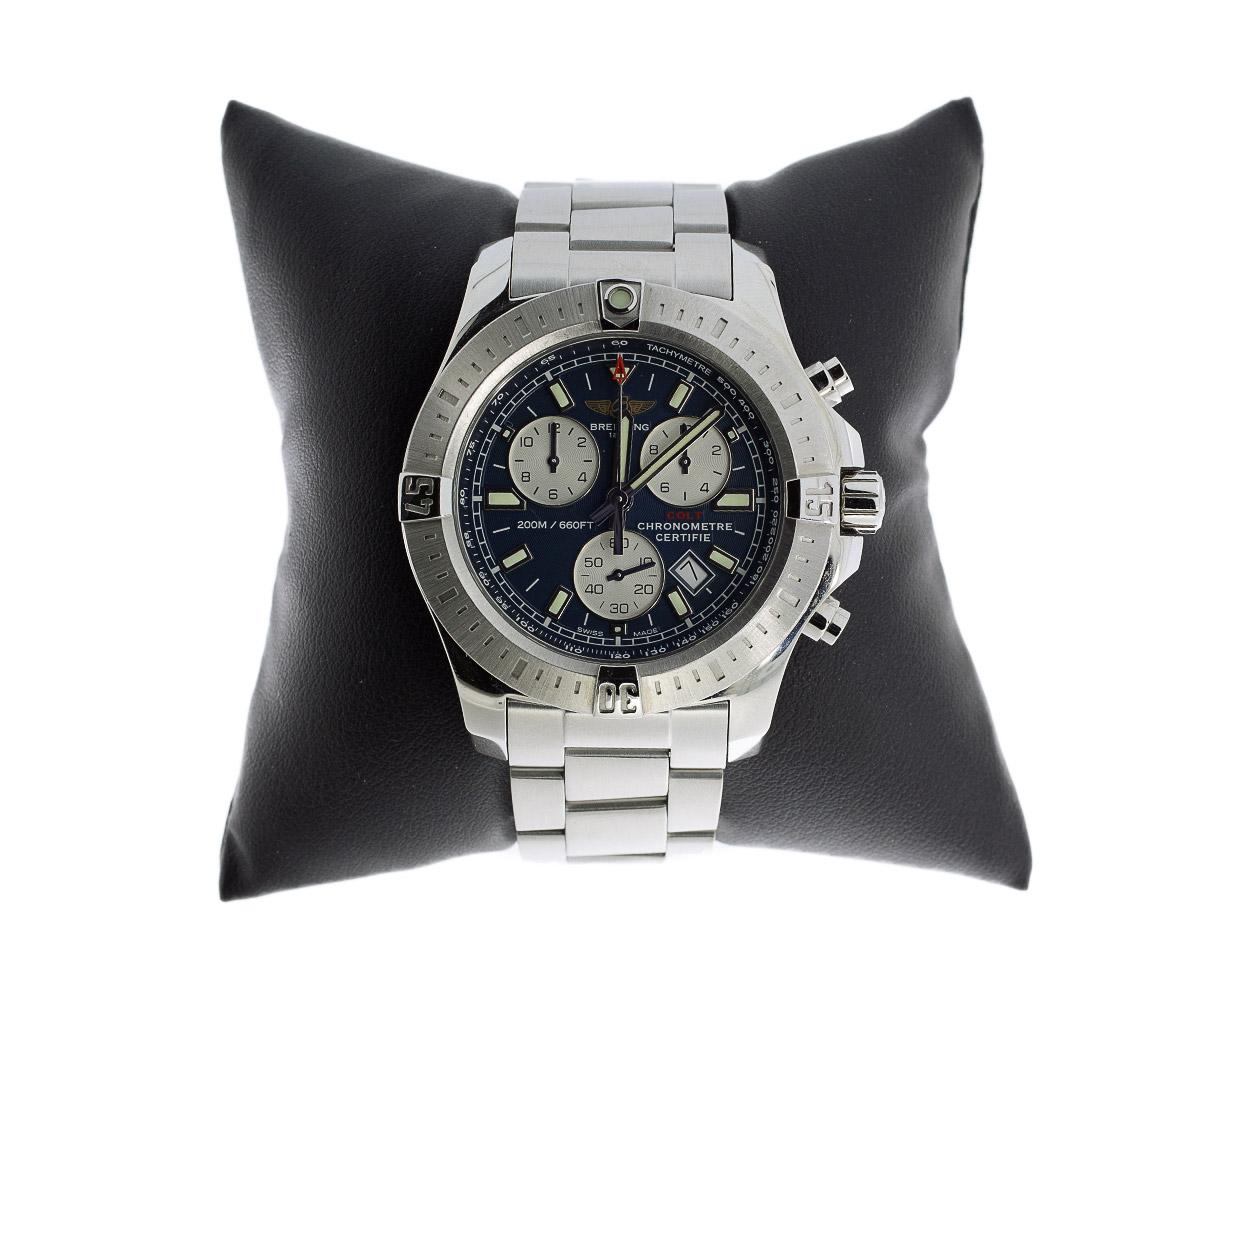 Product Details:
Estimated Retail:  $5,000.00
Condition: Pre Owned
Brand: Breitling
Collection: Colt
Case Material: Stainless Steel
Gender: Mens
MPN: A73380
Movement: Quartz Battery
Face Color: Blue
Band Type: Bracelet
Case Size: 44
Style: